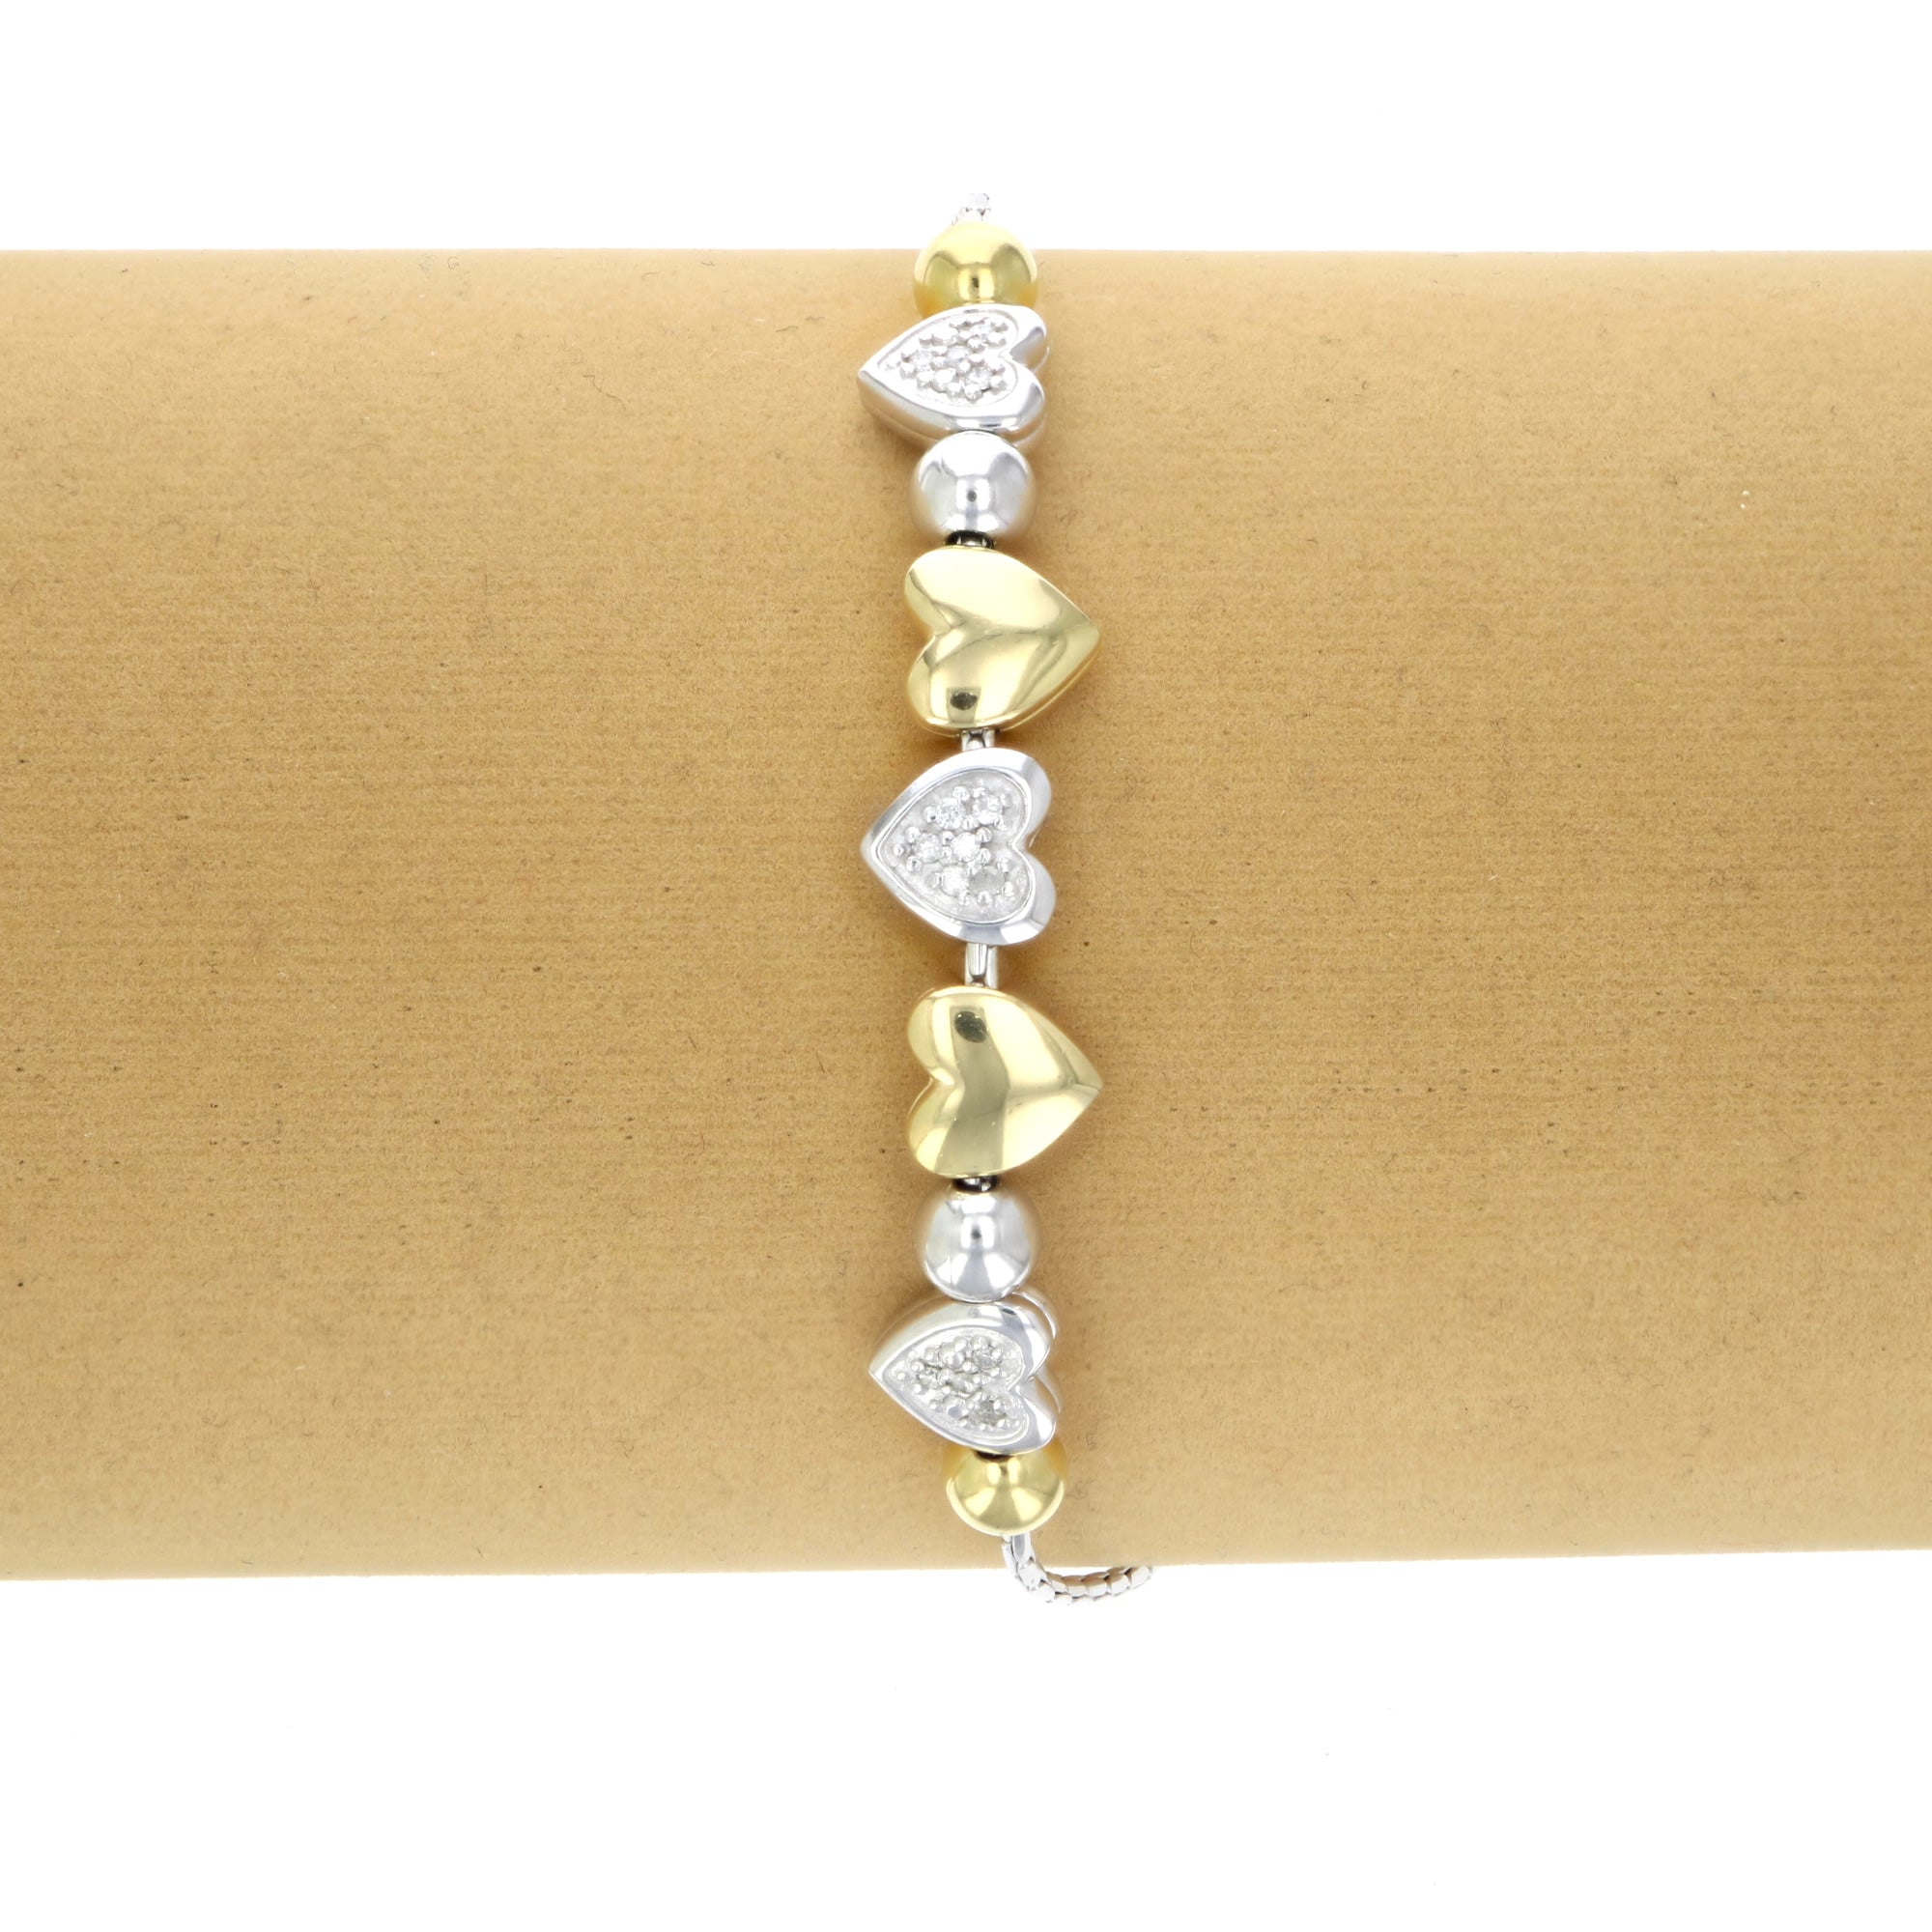 1/10 cttw Diamond Bolo Bracelet Gold Plated Over .925 Sterling Silver (Heart Style)